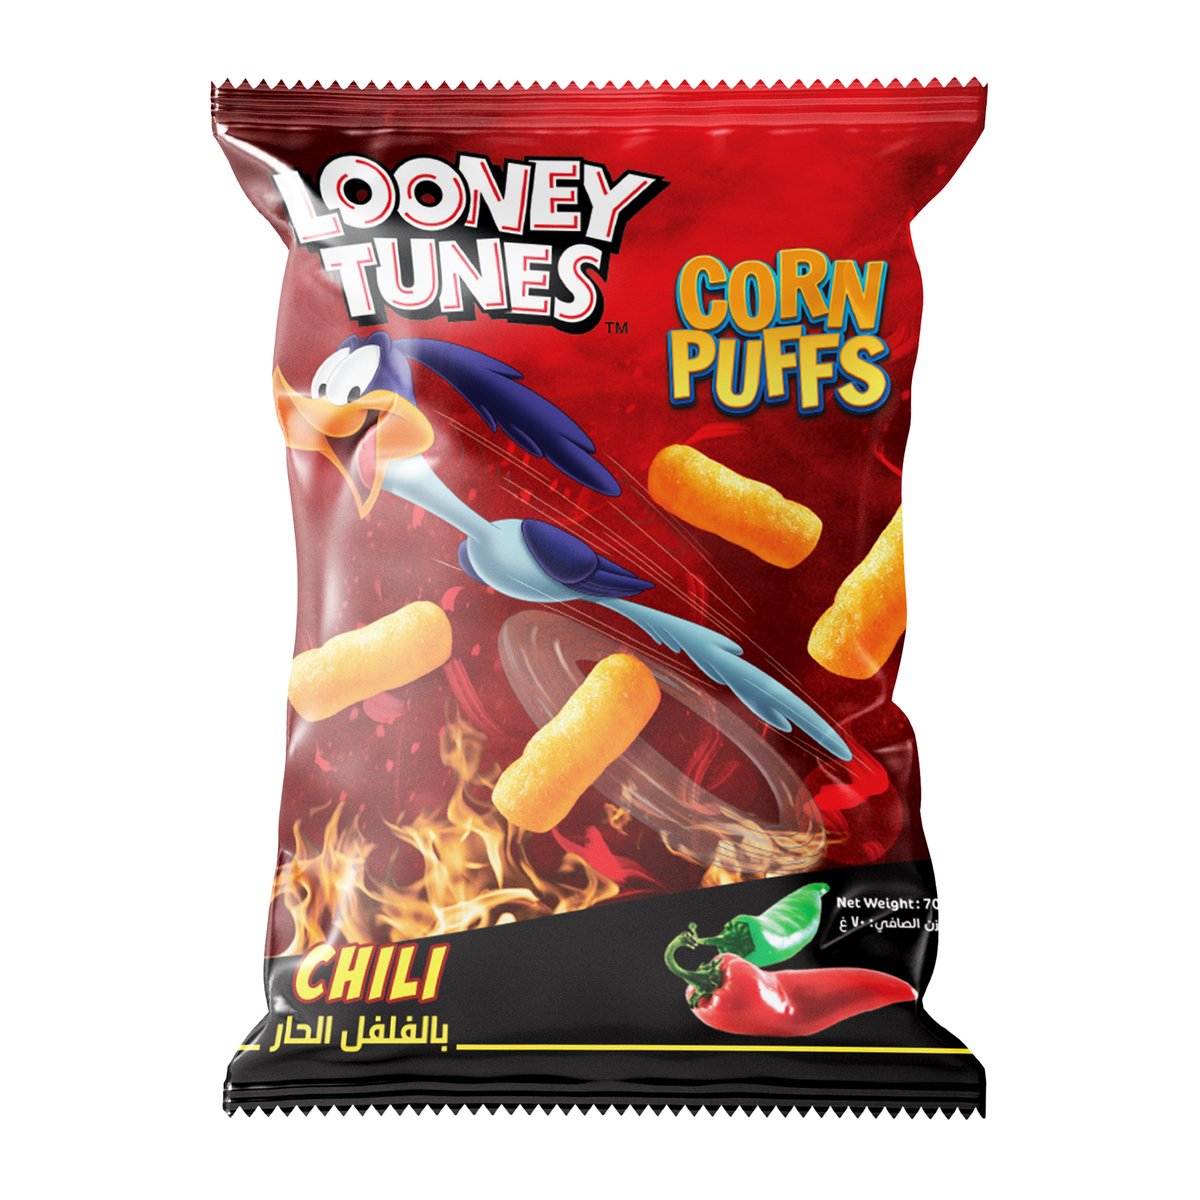 Buy Looney Tunes Chili Corn Puffs 70 g Online at Best Price | NATIONAL DAY PROMOTION GROCERY | Lulu Kuwait in Kuwait